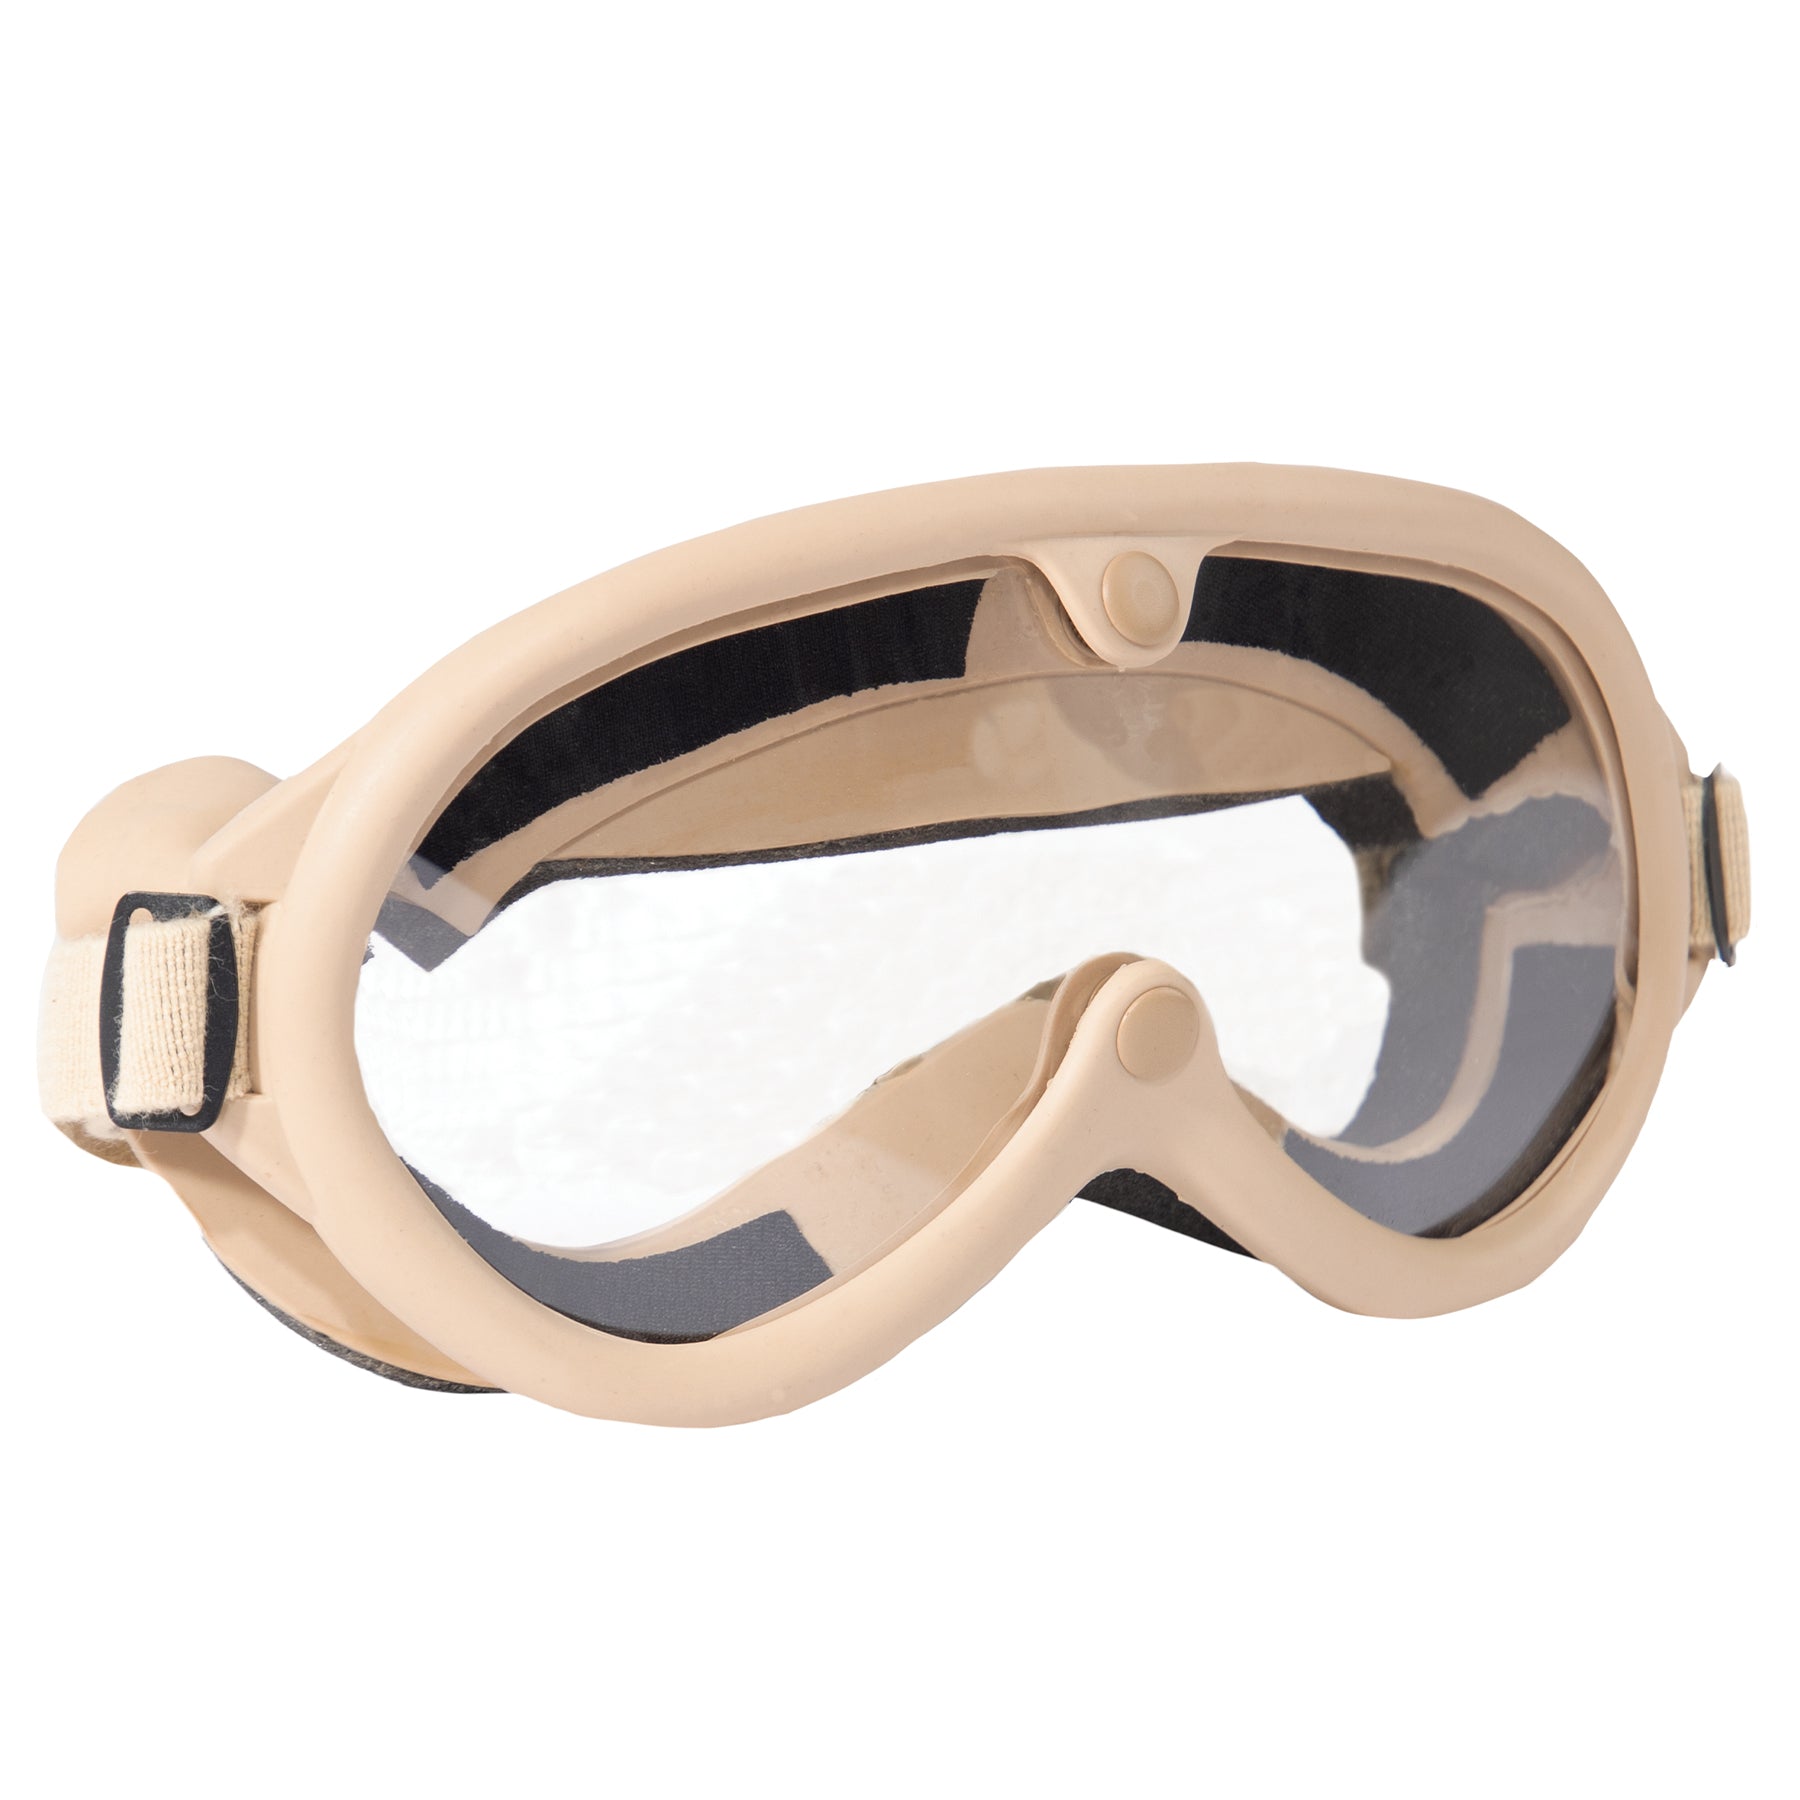 MILITARY G.I. Type Sun, Wind & Dust Goggles - May club